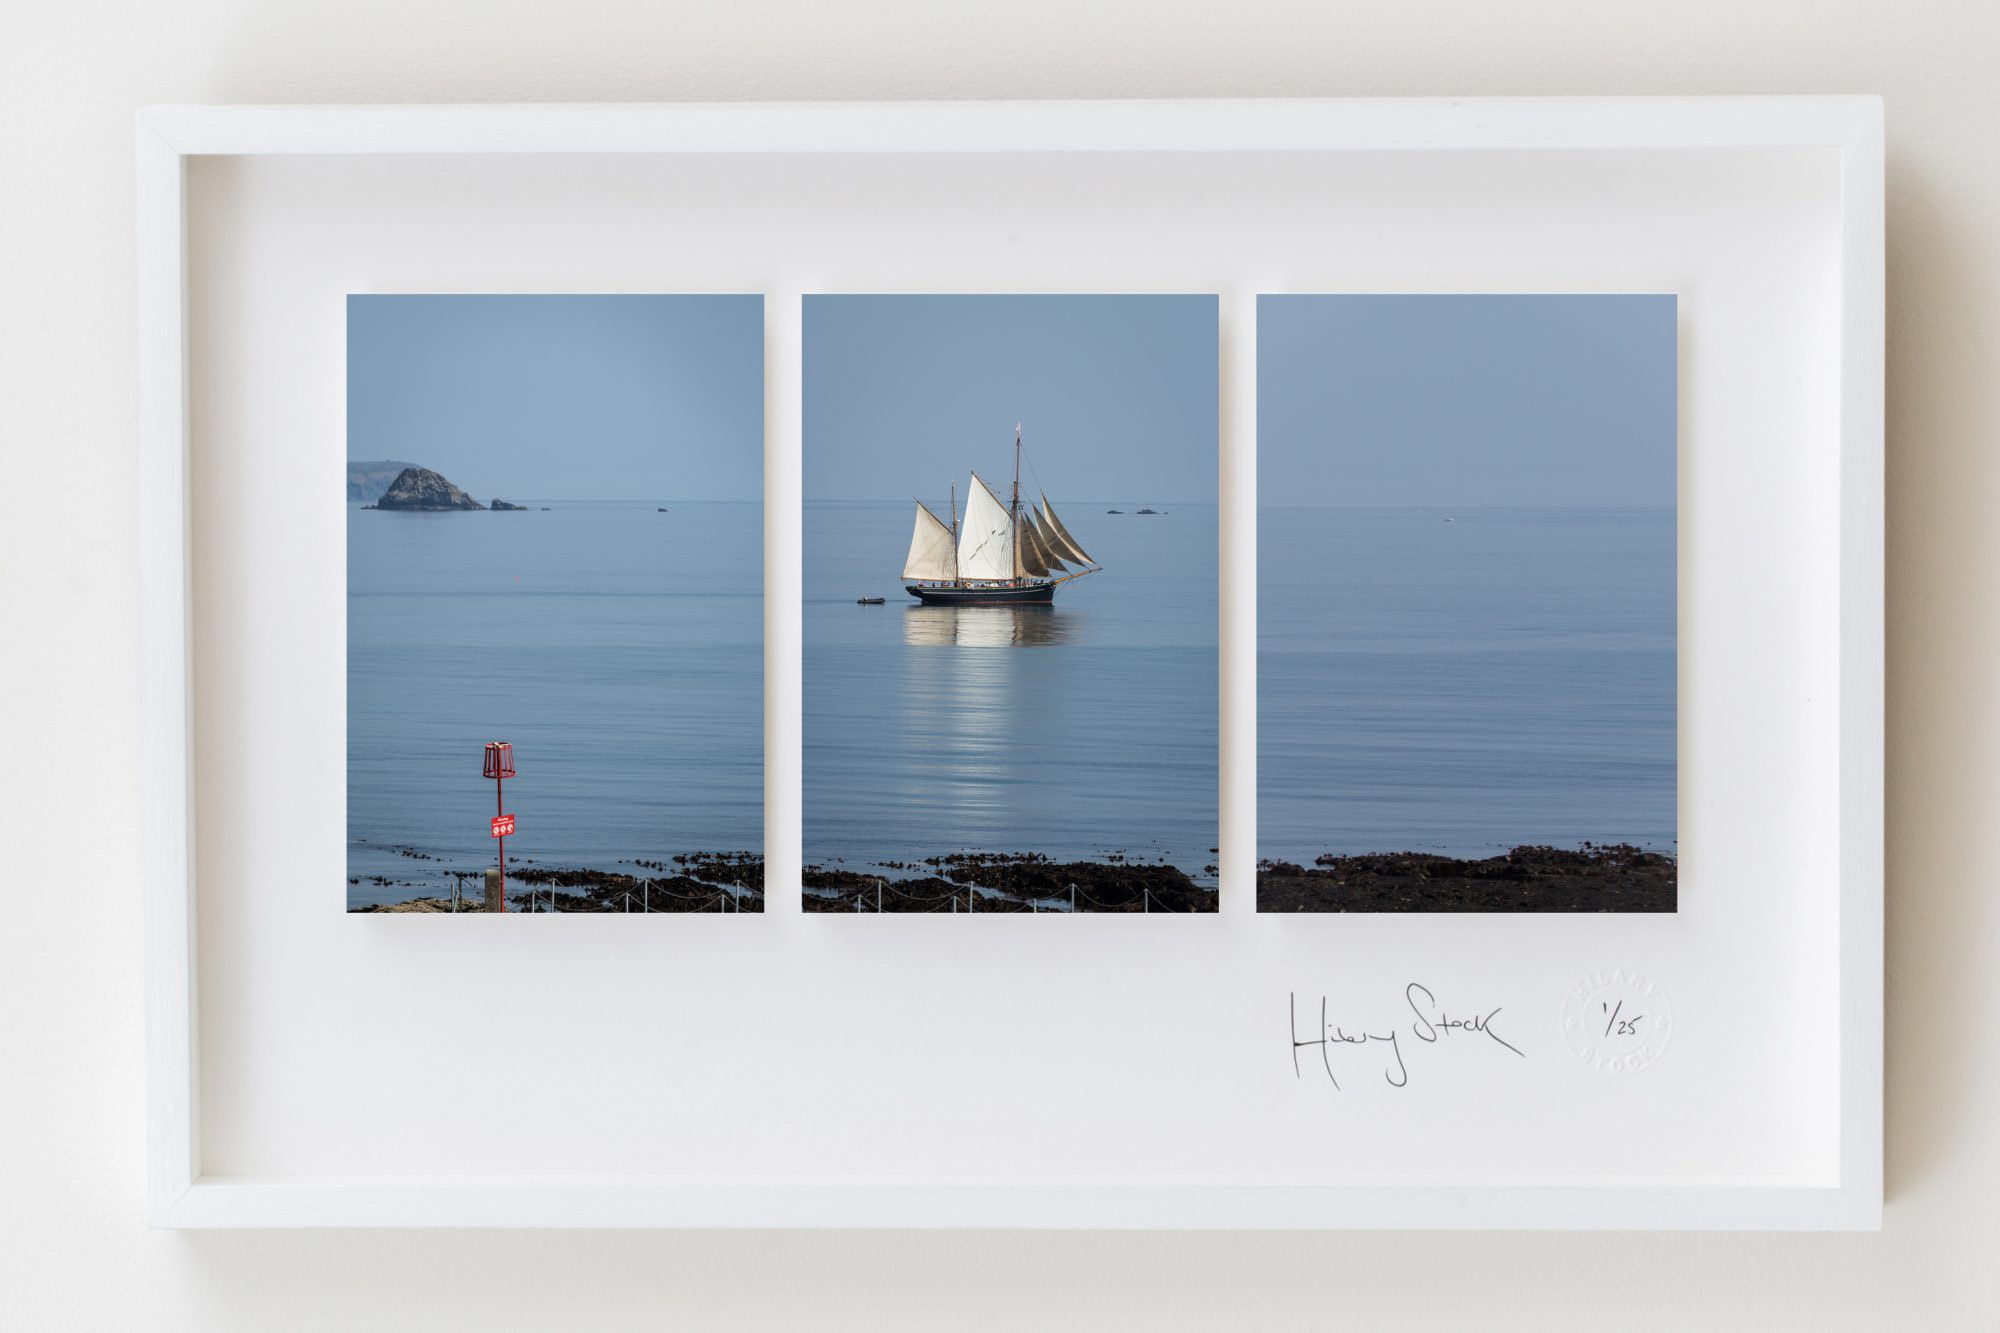 Still Calm V, by Hilary Stock. Fine art photography from Cornwall.